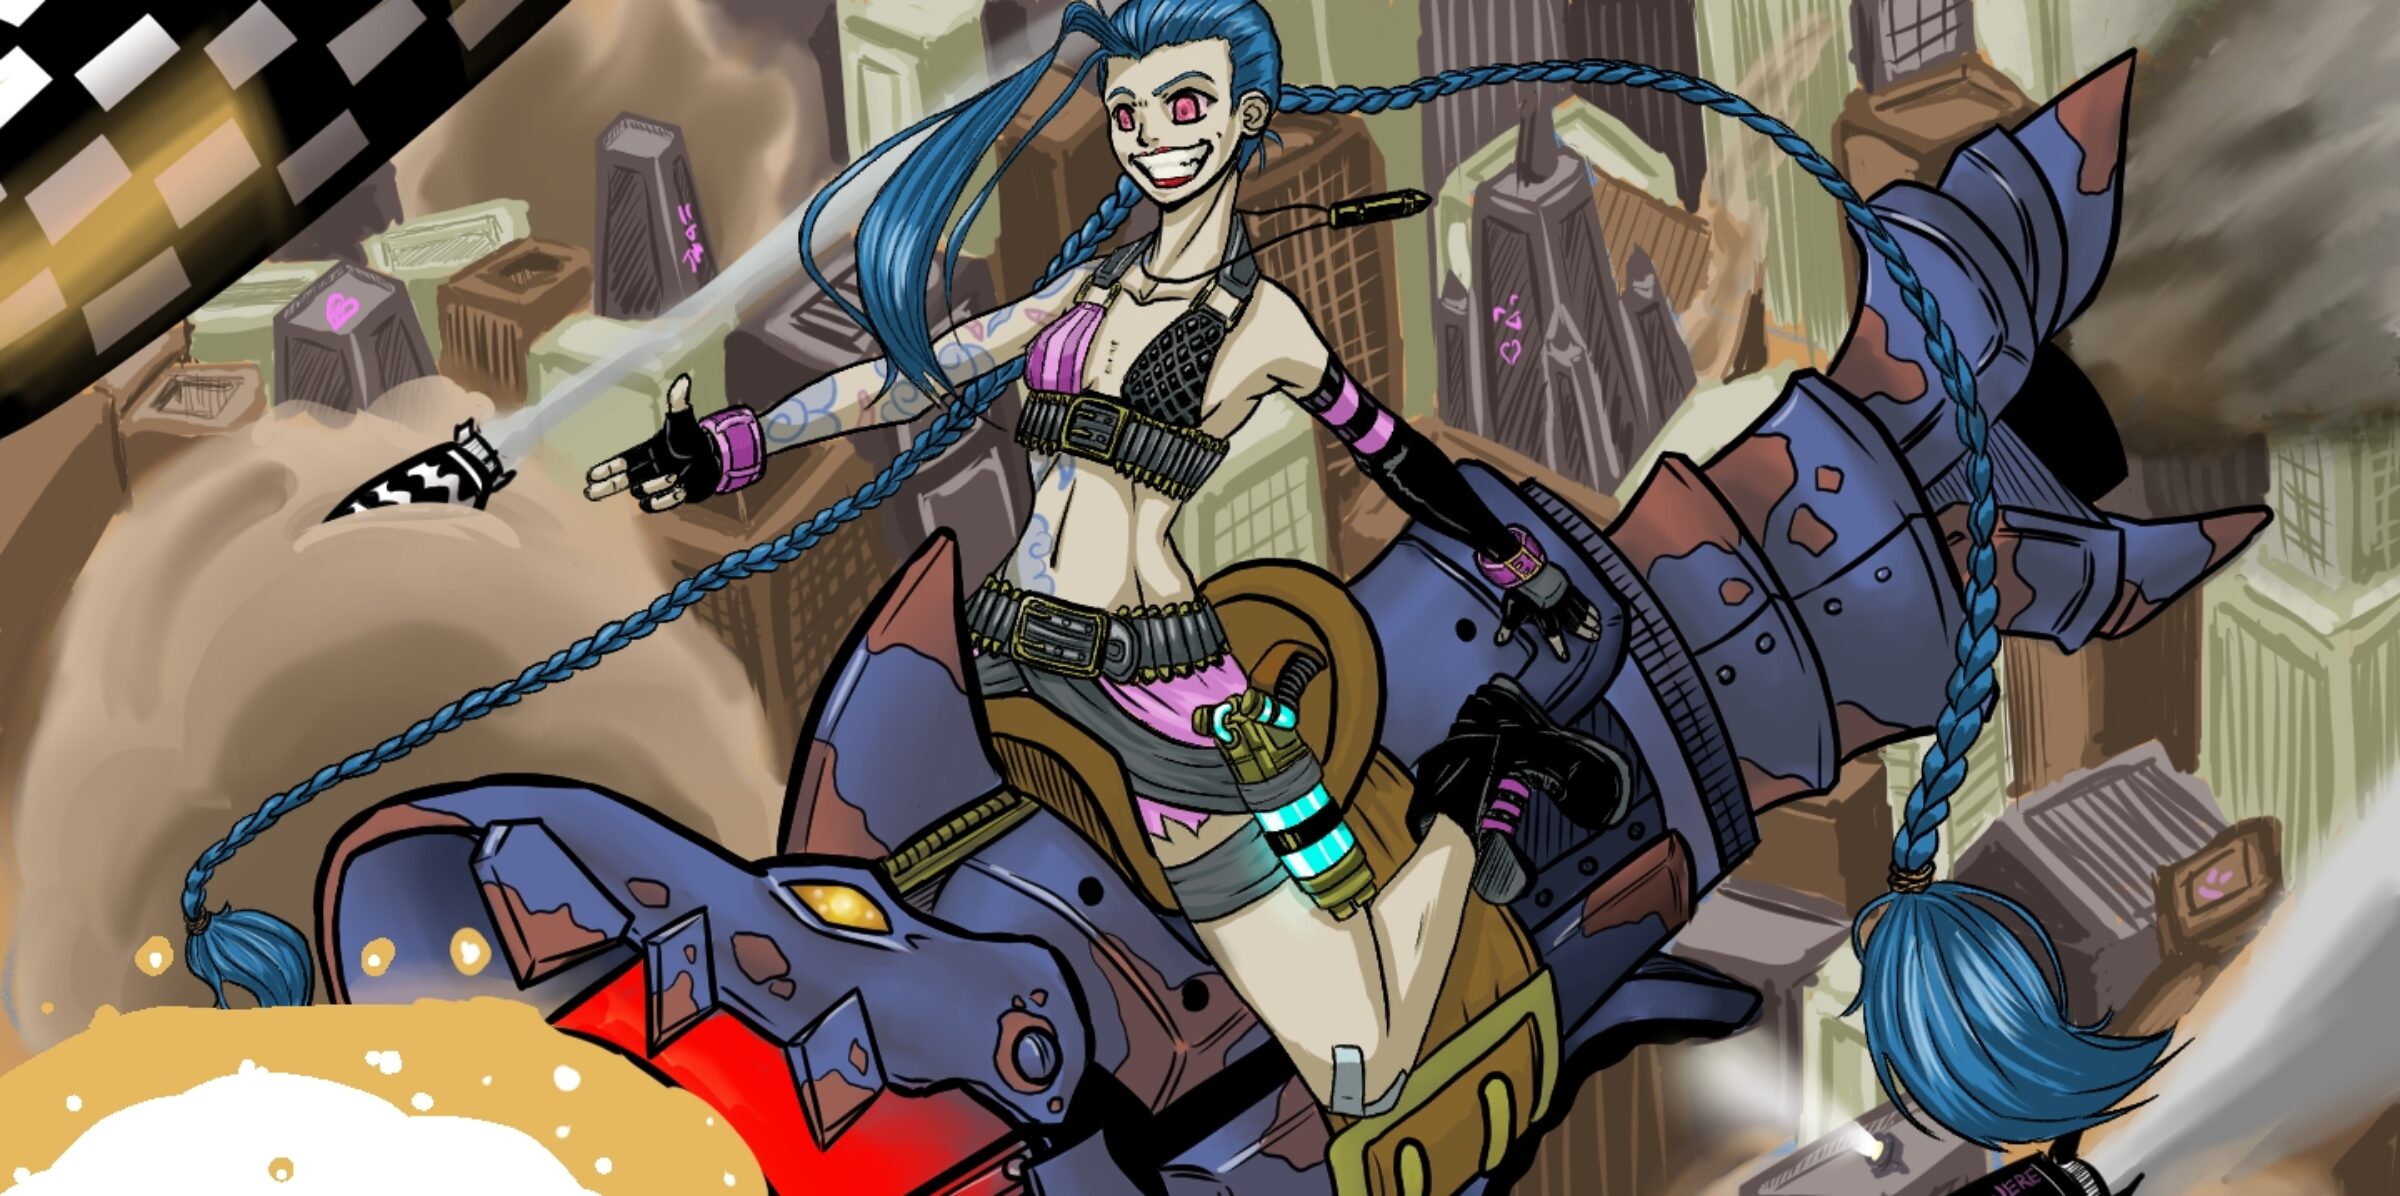 cropped-DrawwithJosh-Jinx-League-of-Legends-contest.jpg